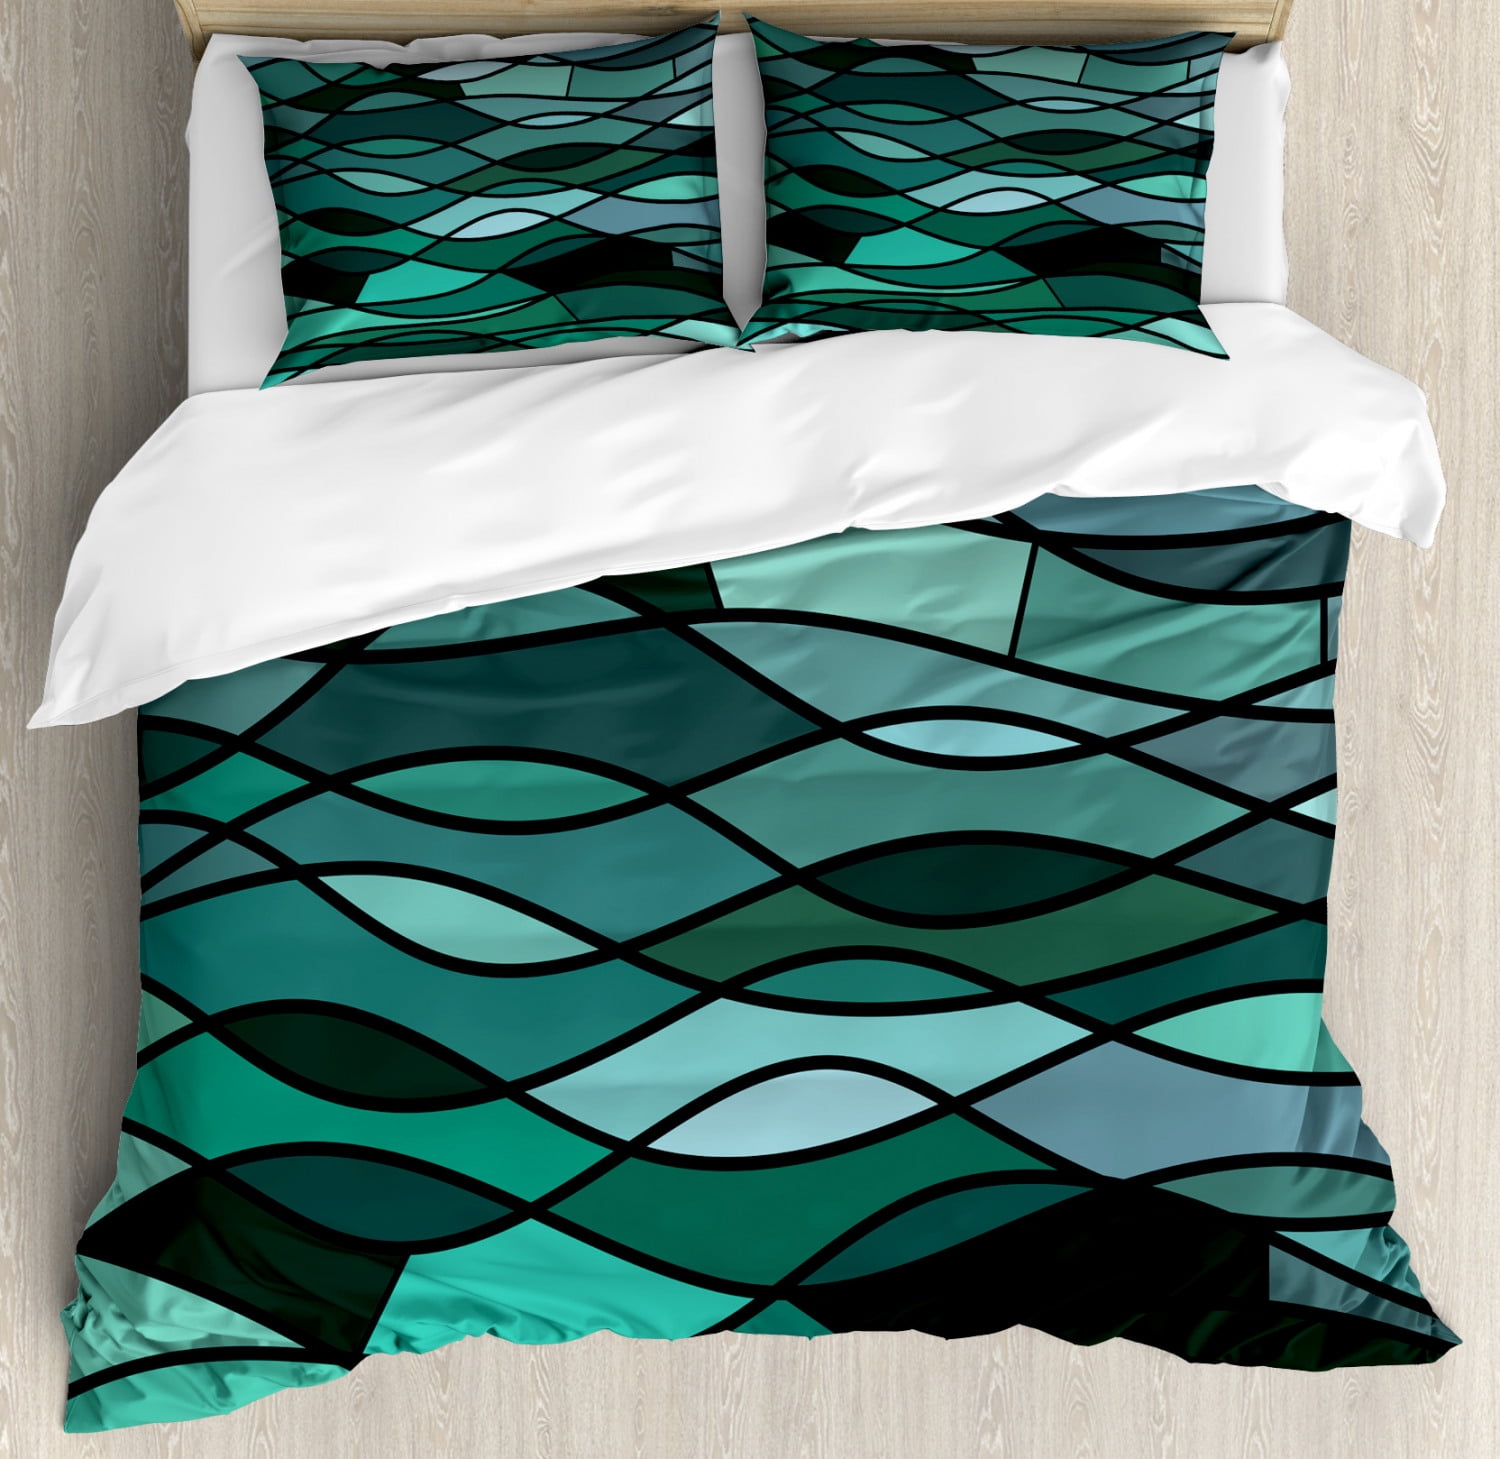 Teal Duvet Cover Set Abstract Mosaic Waves Ocean Inspired